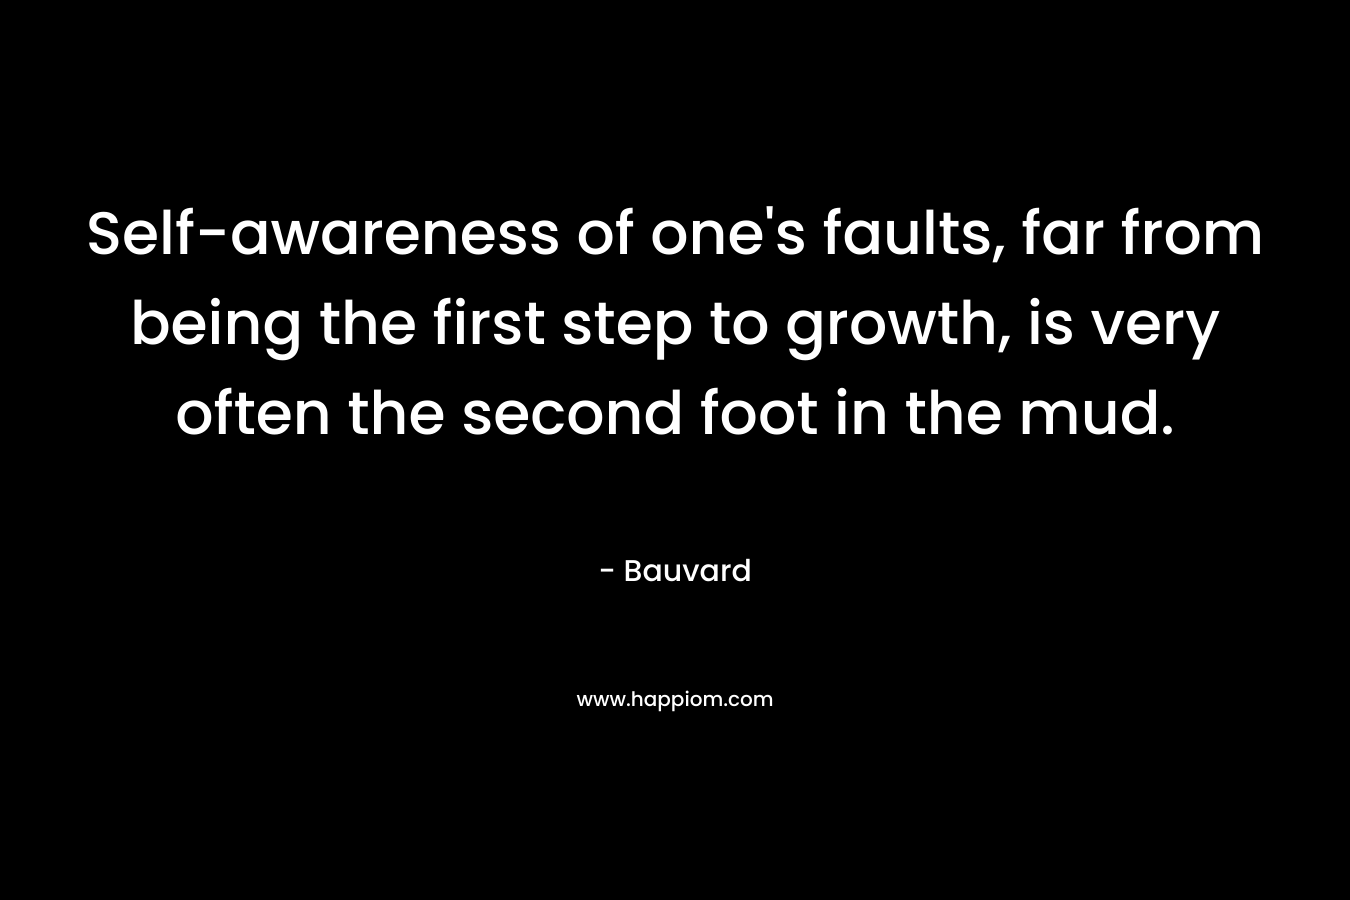 Self-awareness of one's faults, far from being the first step to growth, is very often the second foot in the mud.